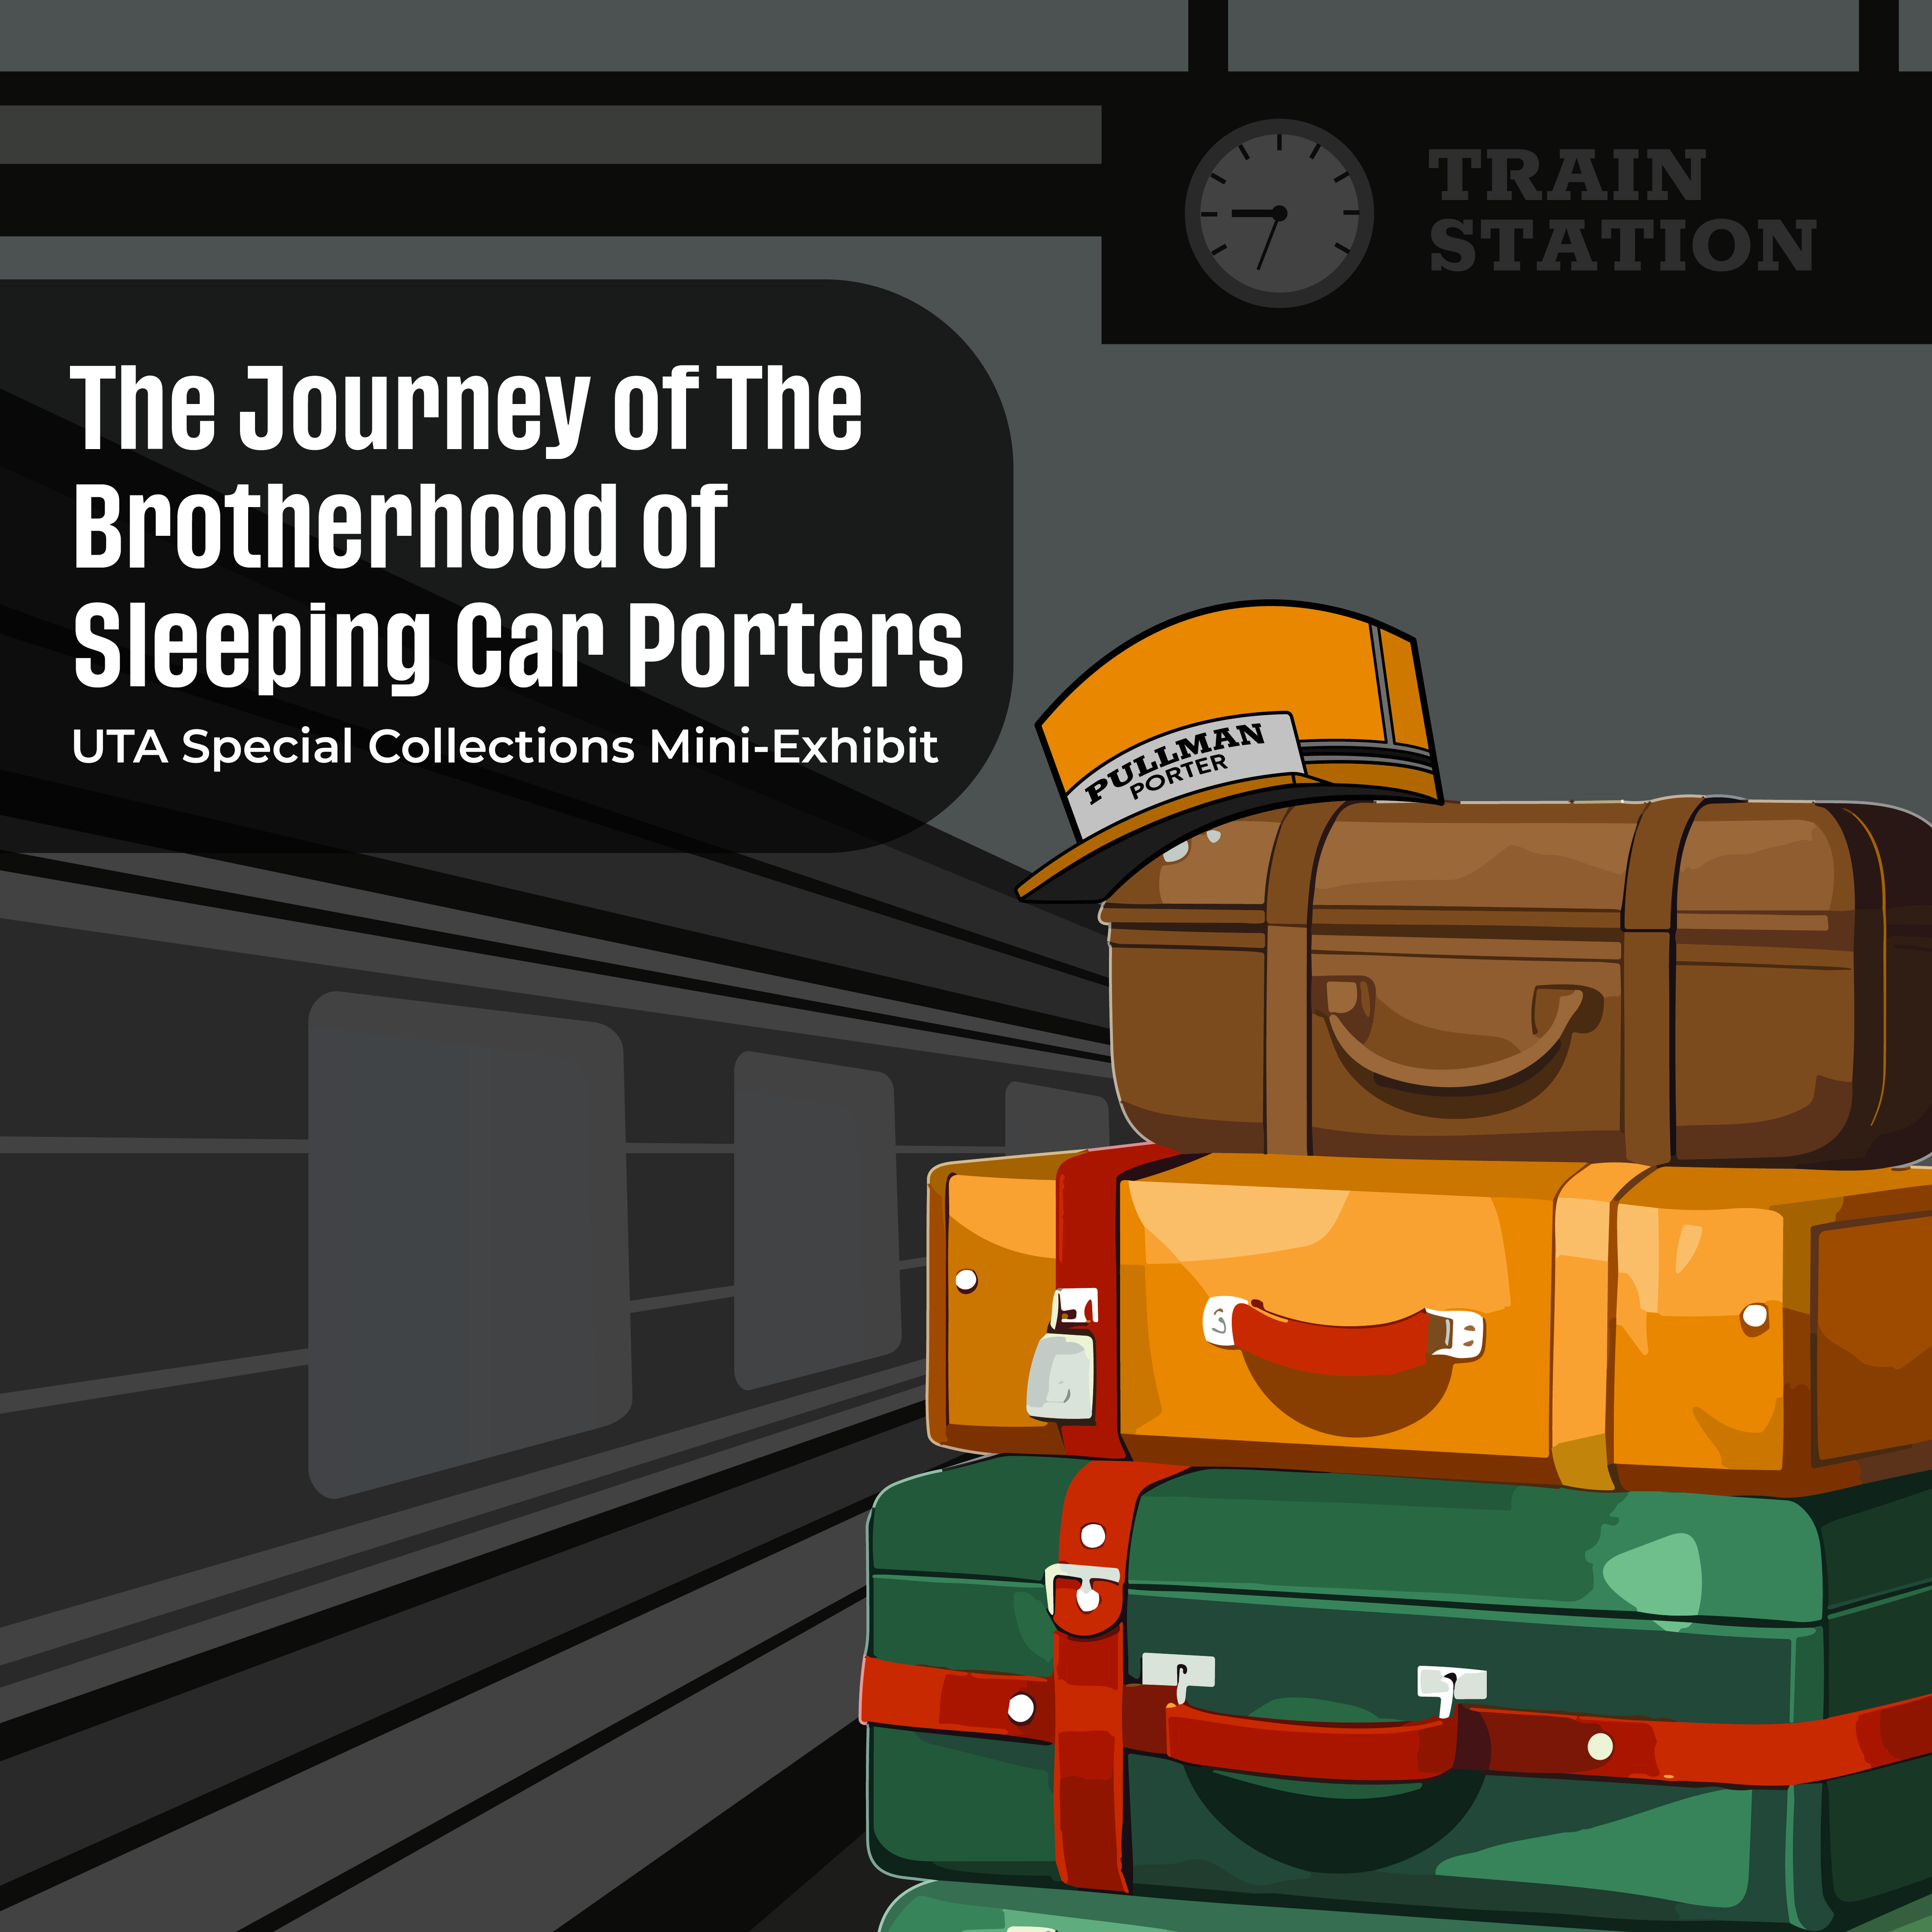 The Journey of the Brotherhood of Sleeping Car Porters poster.